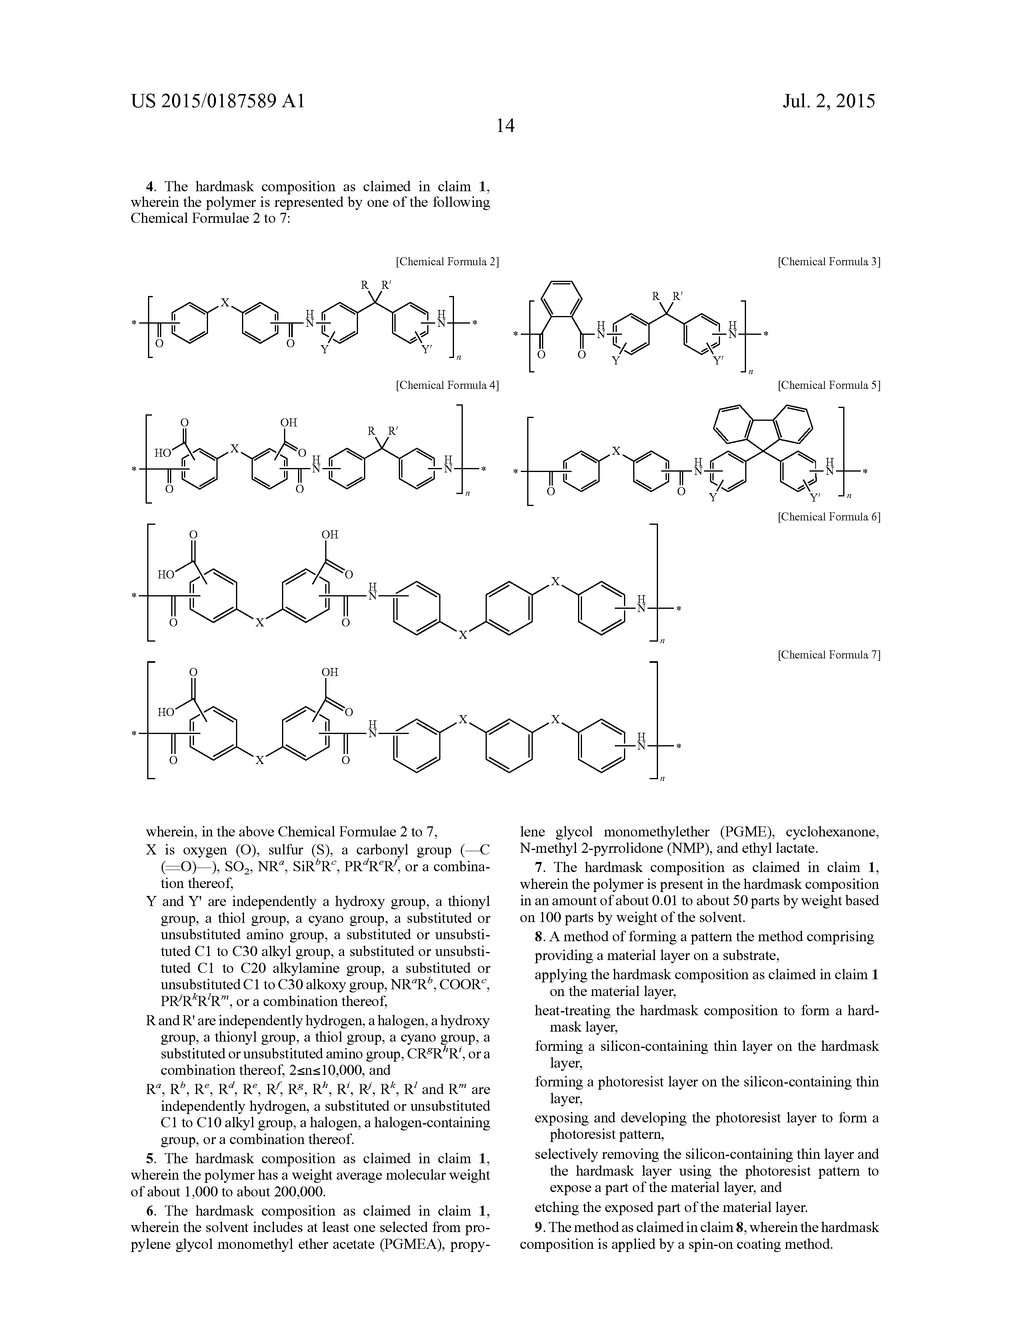 HARDMASK COMPOSITION AND METHOD OF FORMING PATTERNS USING THE HARDMASK     COMPOSITION - diagram, schematic, and image 16